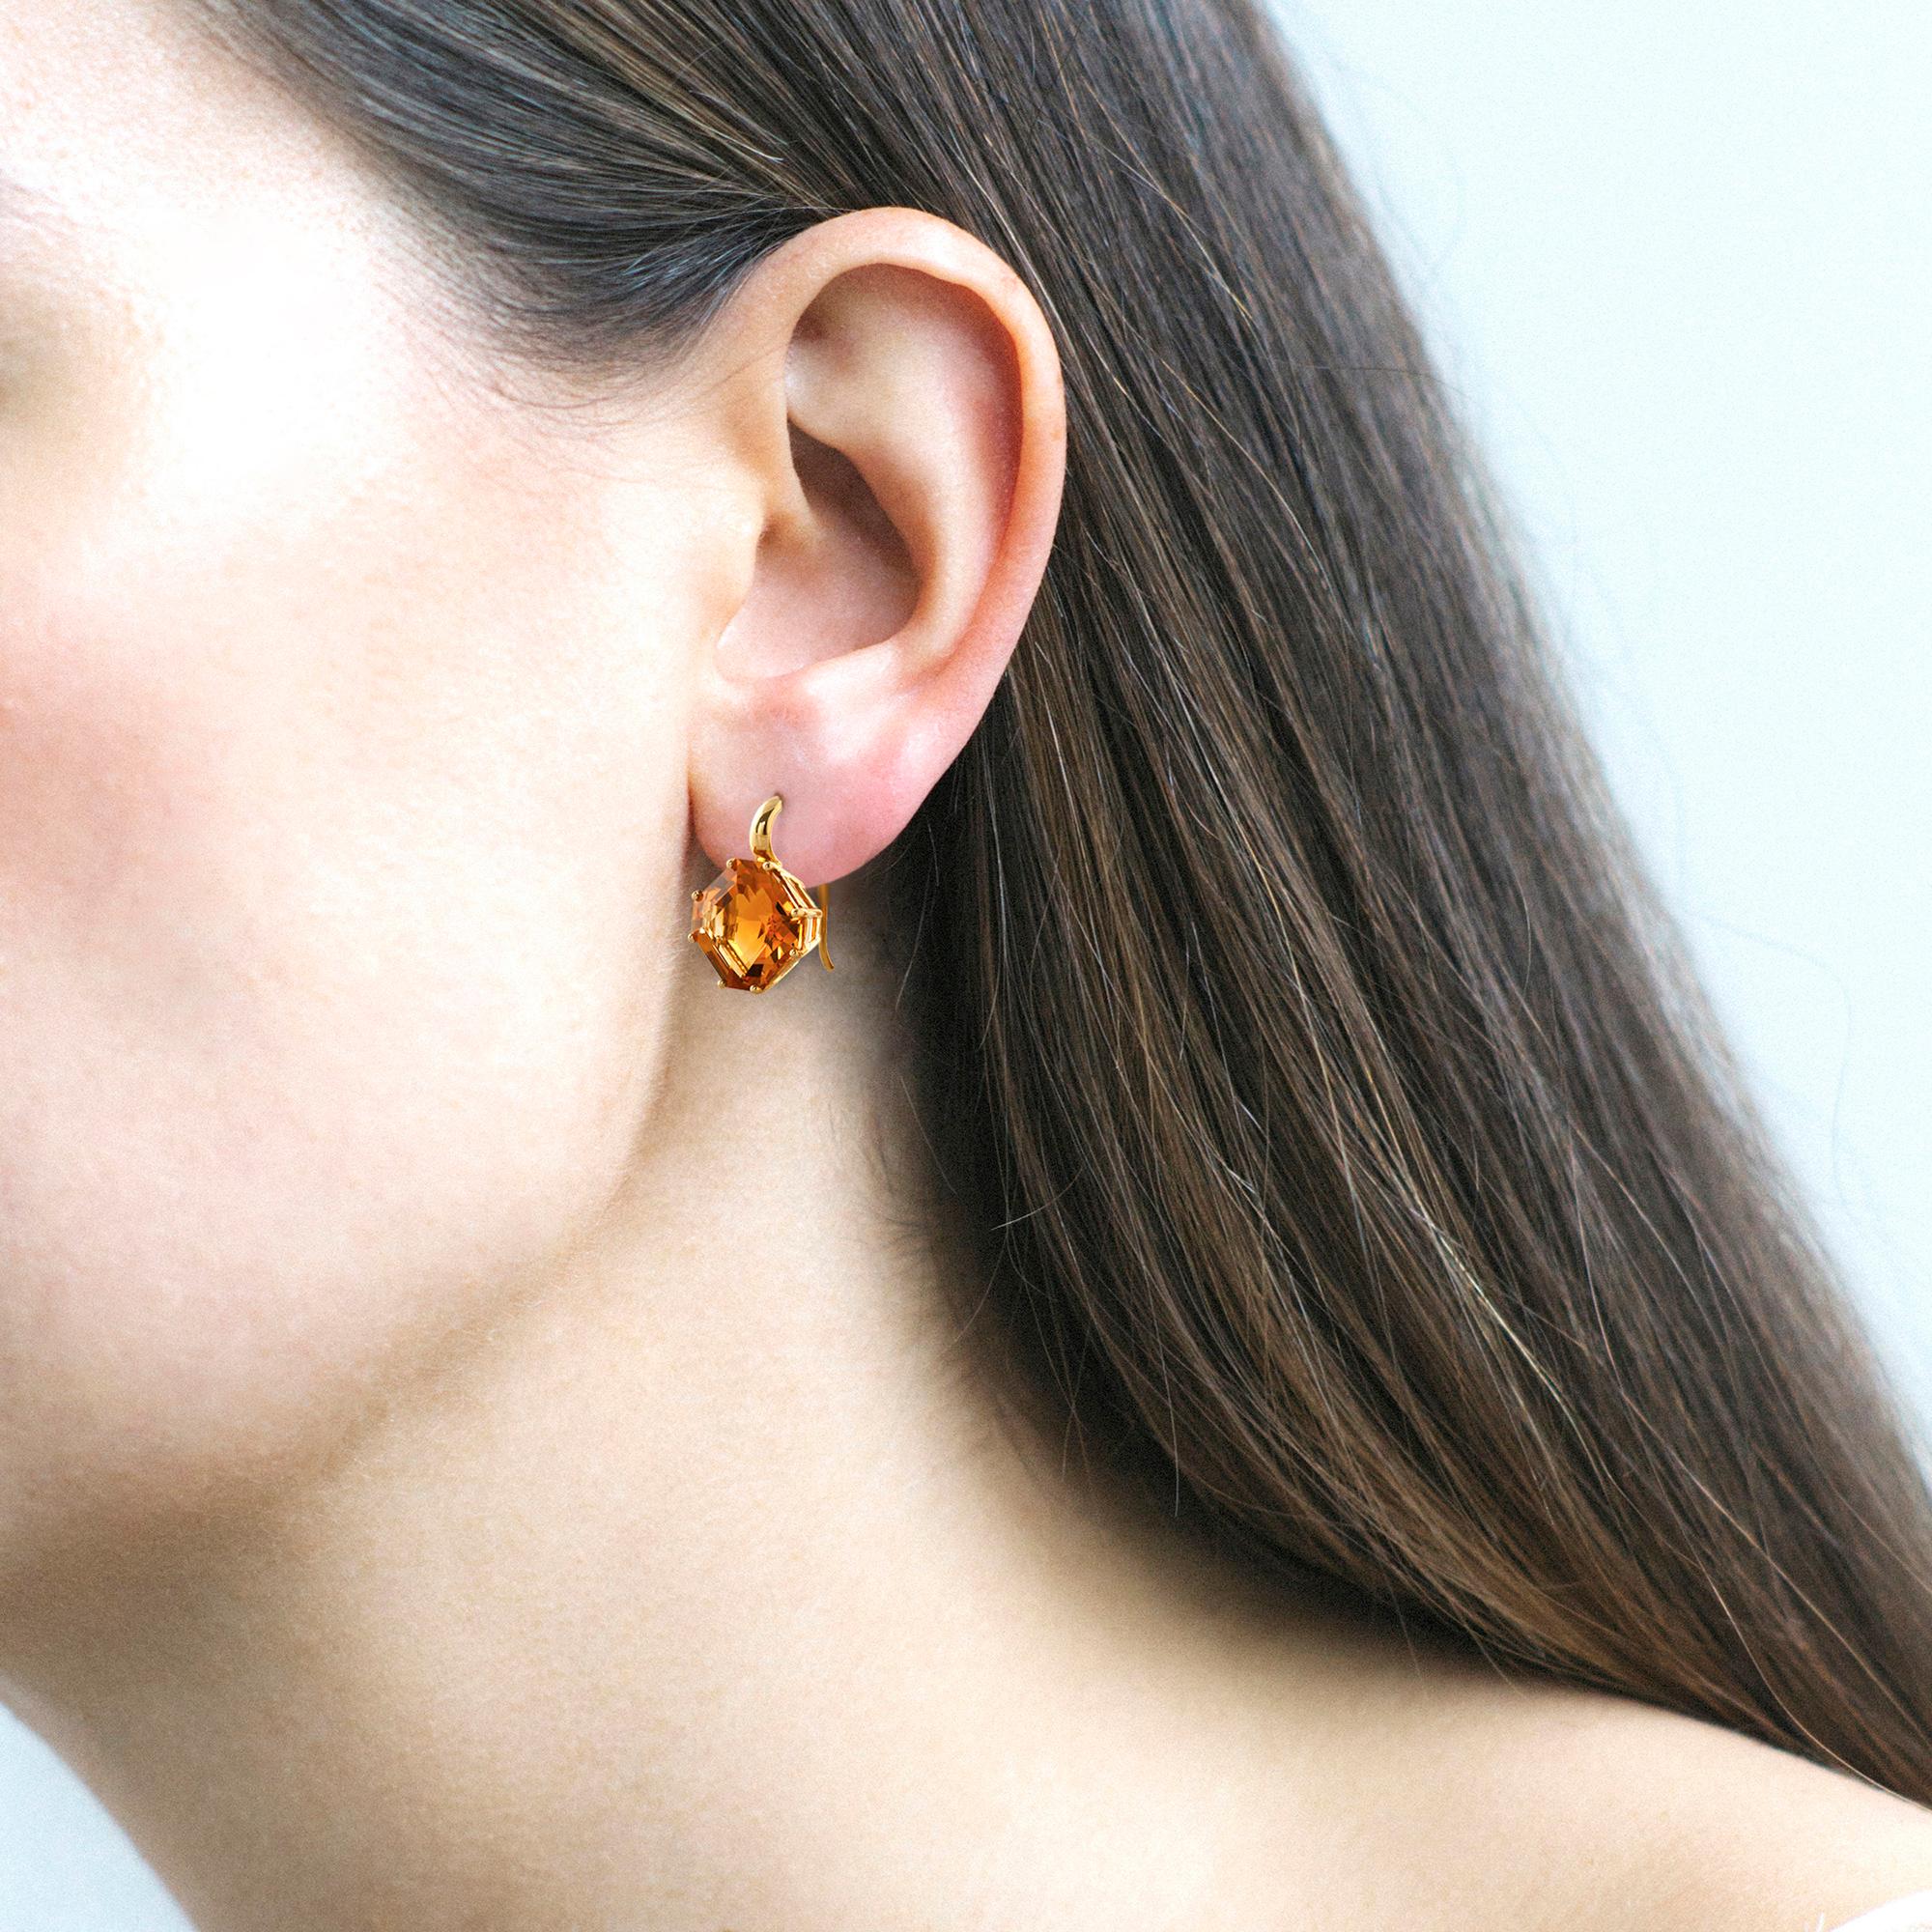 Elevate your elegance with our Citrine Square Emerald Cut Earrings from the enchanting 'Gossip' Collection. Crafted in luxurious 18K Yellow Gold, these exquisite earrings feature dazzling citrine gemstones in a chic emerald cut, suspended delicately